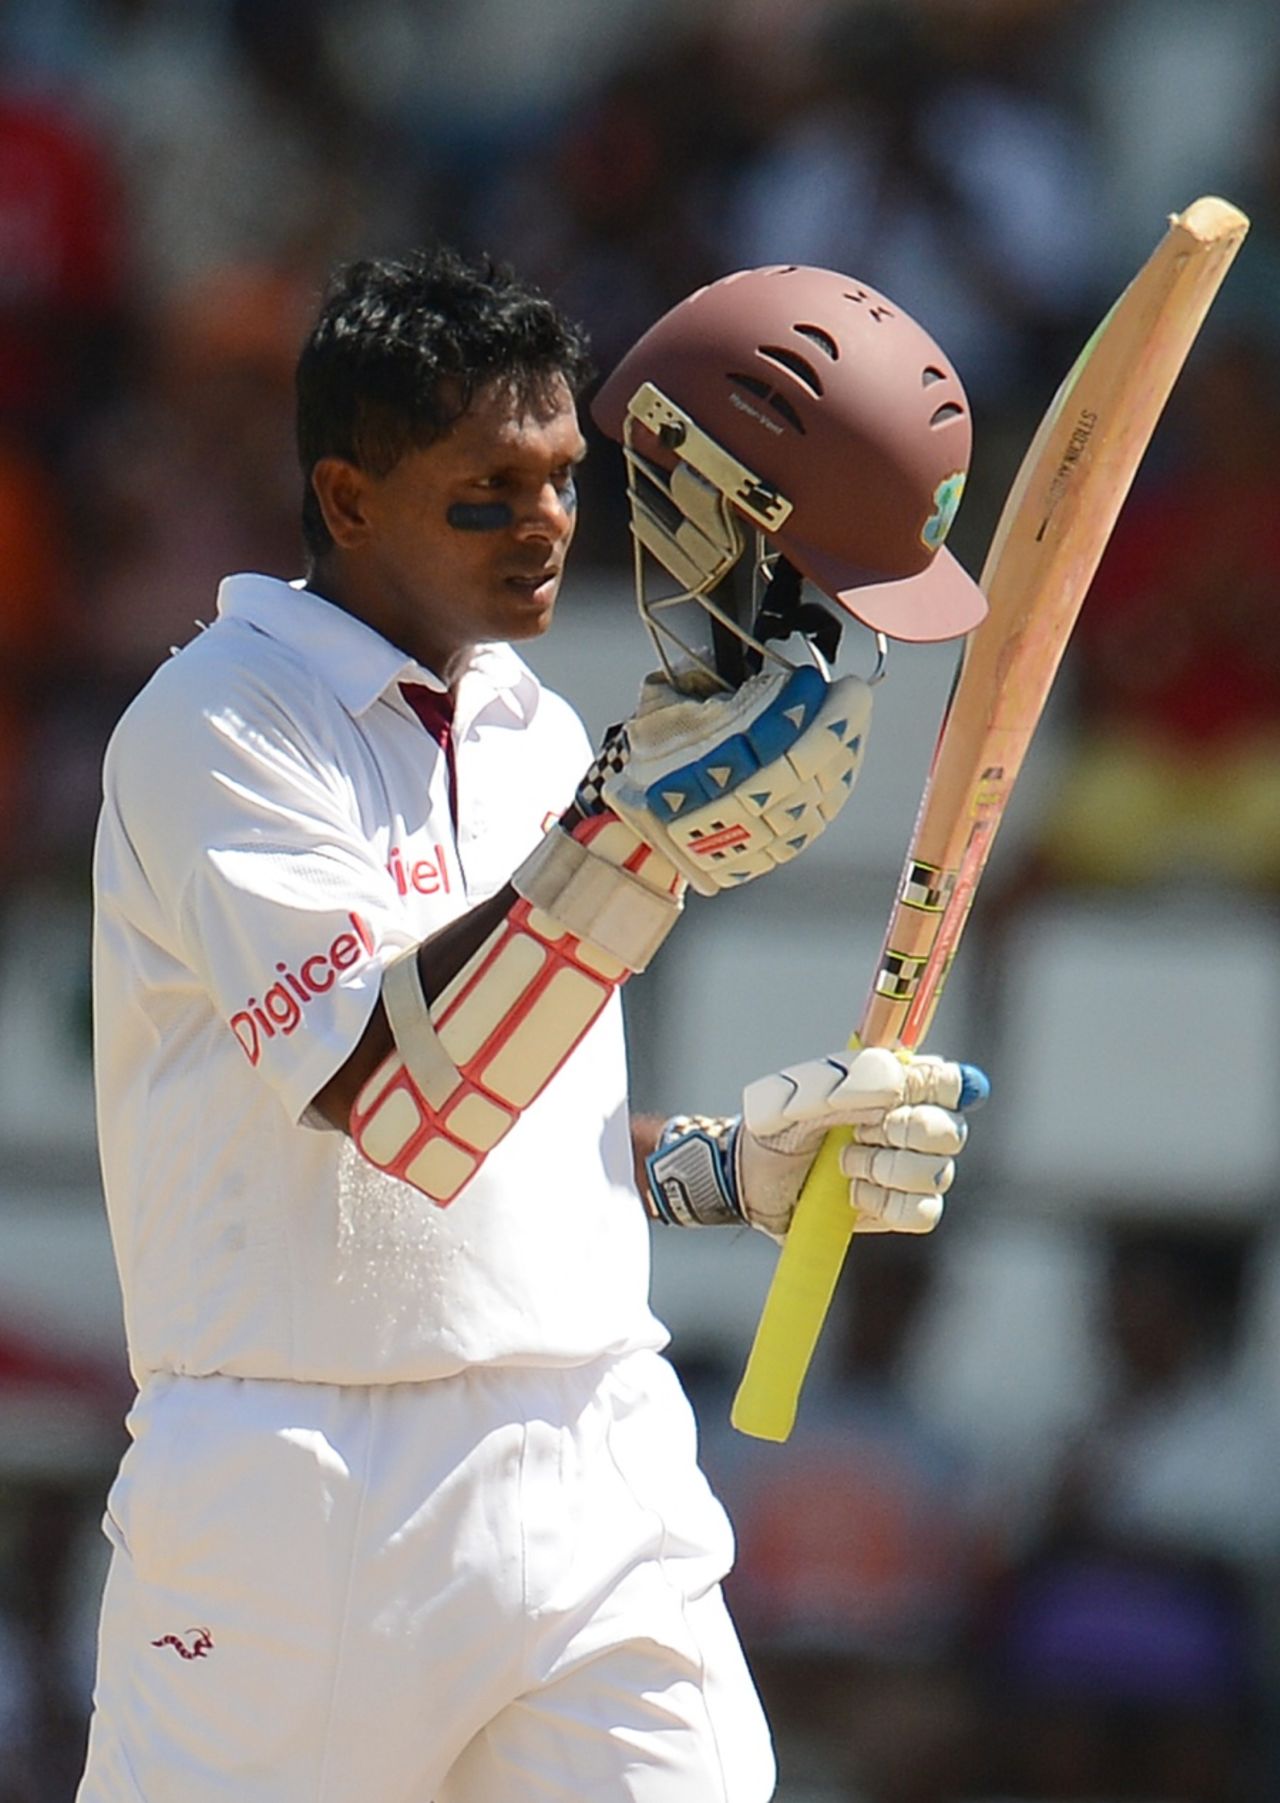 Shivnarine Chanderpaul acknowledges the applause after scoring his 10,000th Test run, West Indies v Australia, 3rd Test, Roseau, 4th day, April 26, 2012